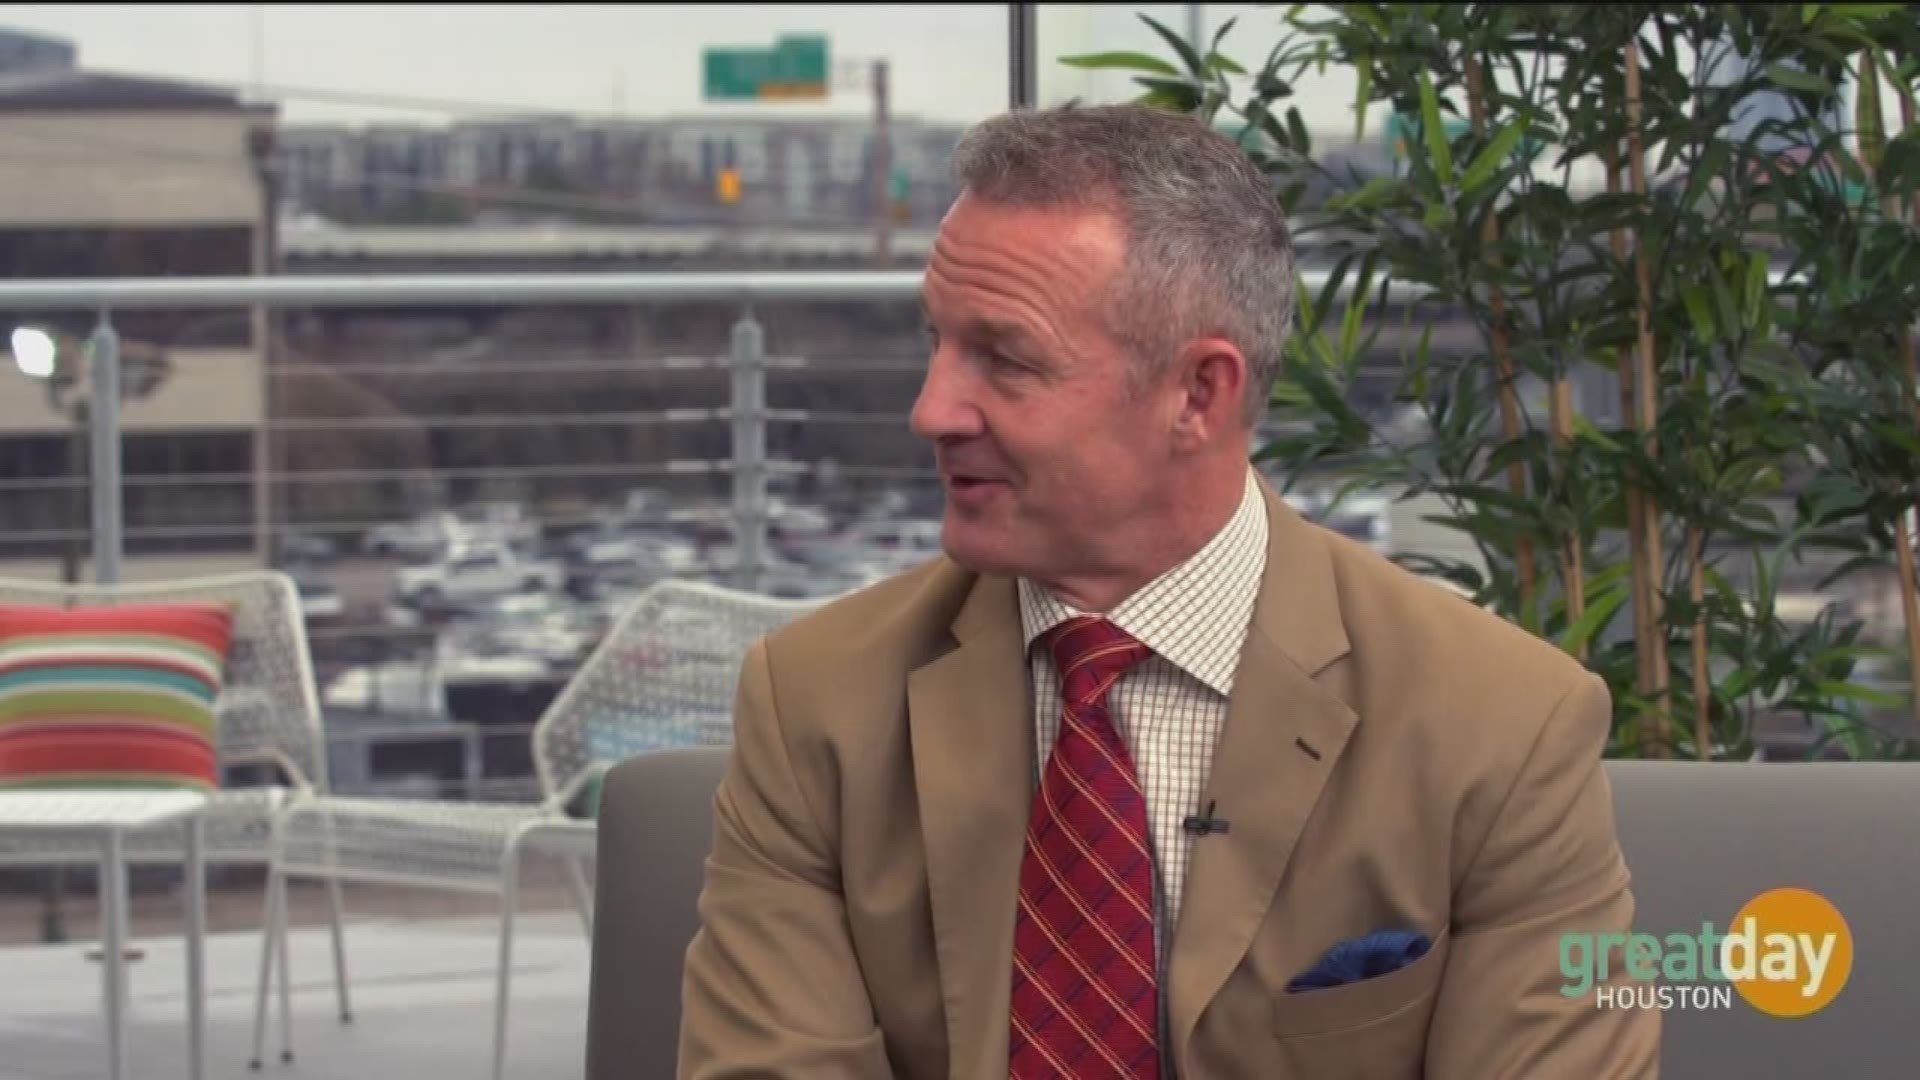 Former NFL player Merril Hoge discusses the bad science behind CTE in his book “Brainwashed.”